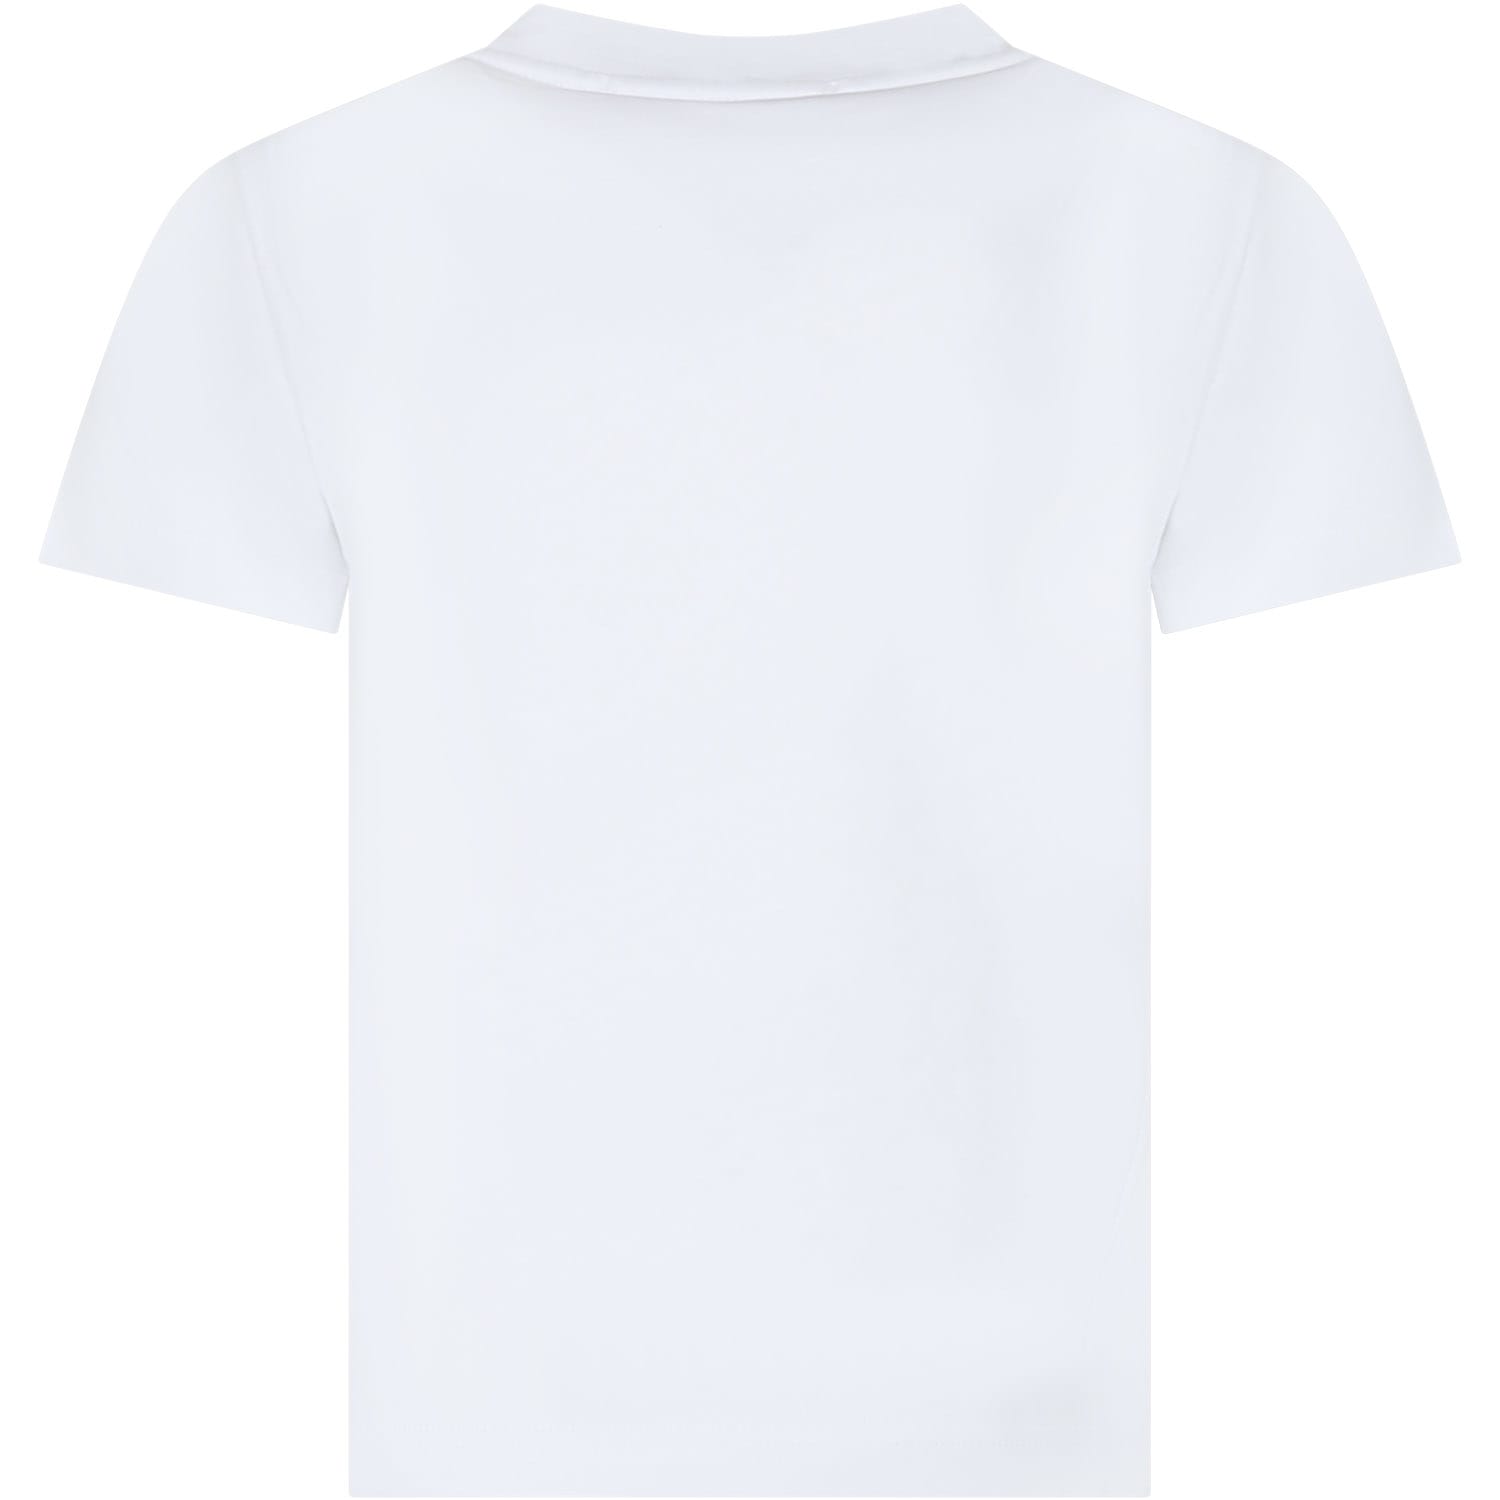 Shop Alessandro Enriquez White T-shirt For Girl With Mermaid Print And Stars